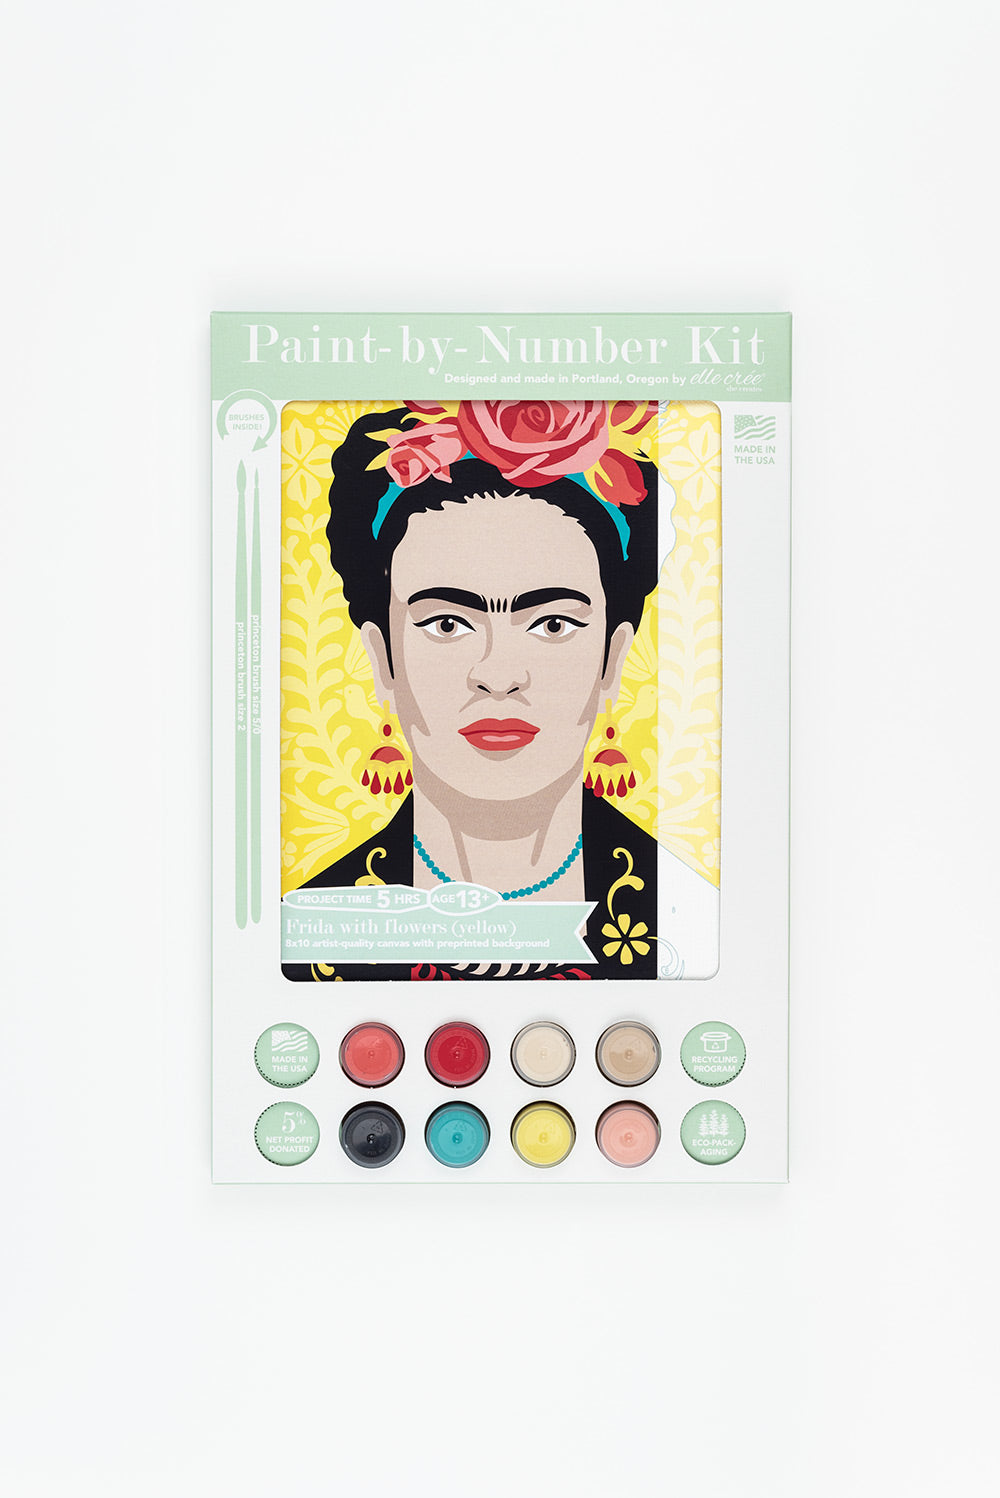 Paint by number kit of a Frida Kahlo portrait in its mint green and white packaging by Elle Crée.